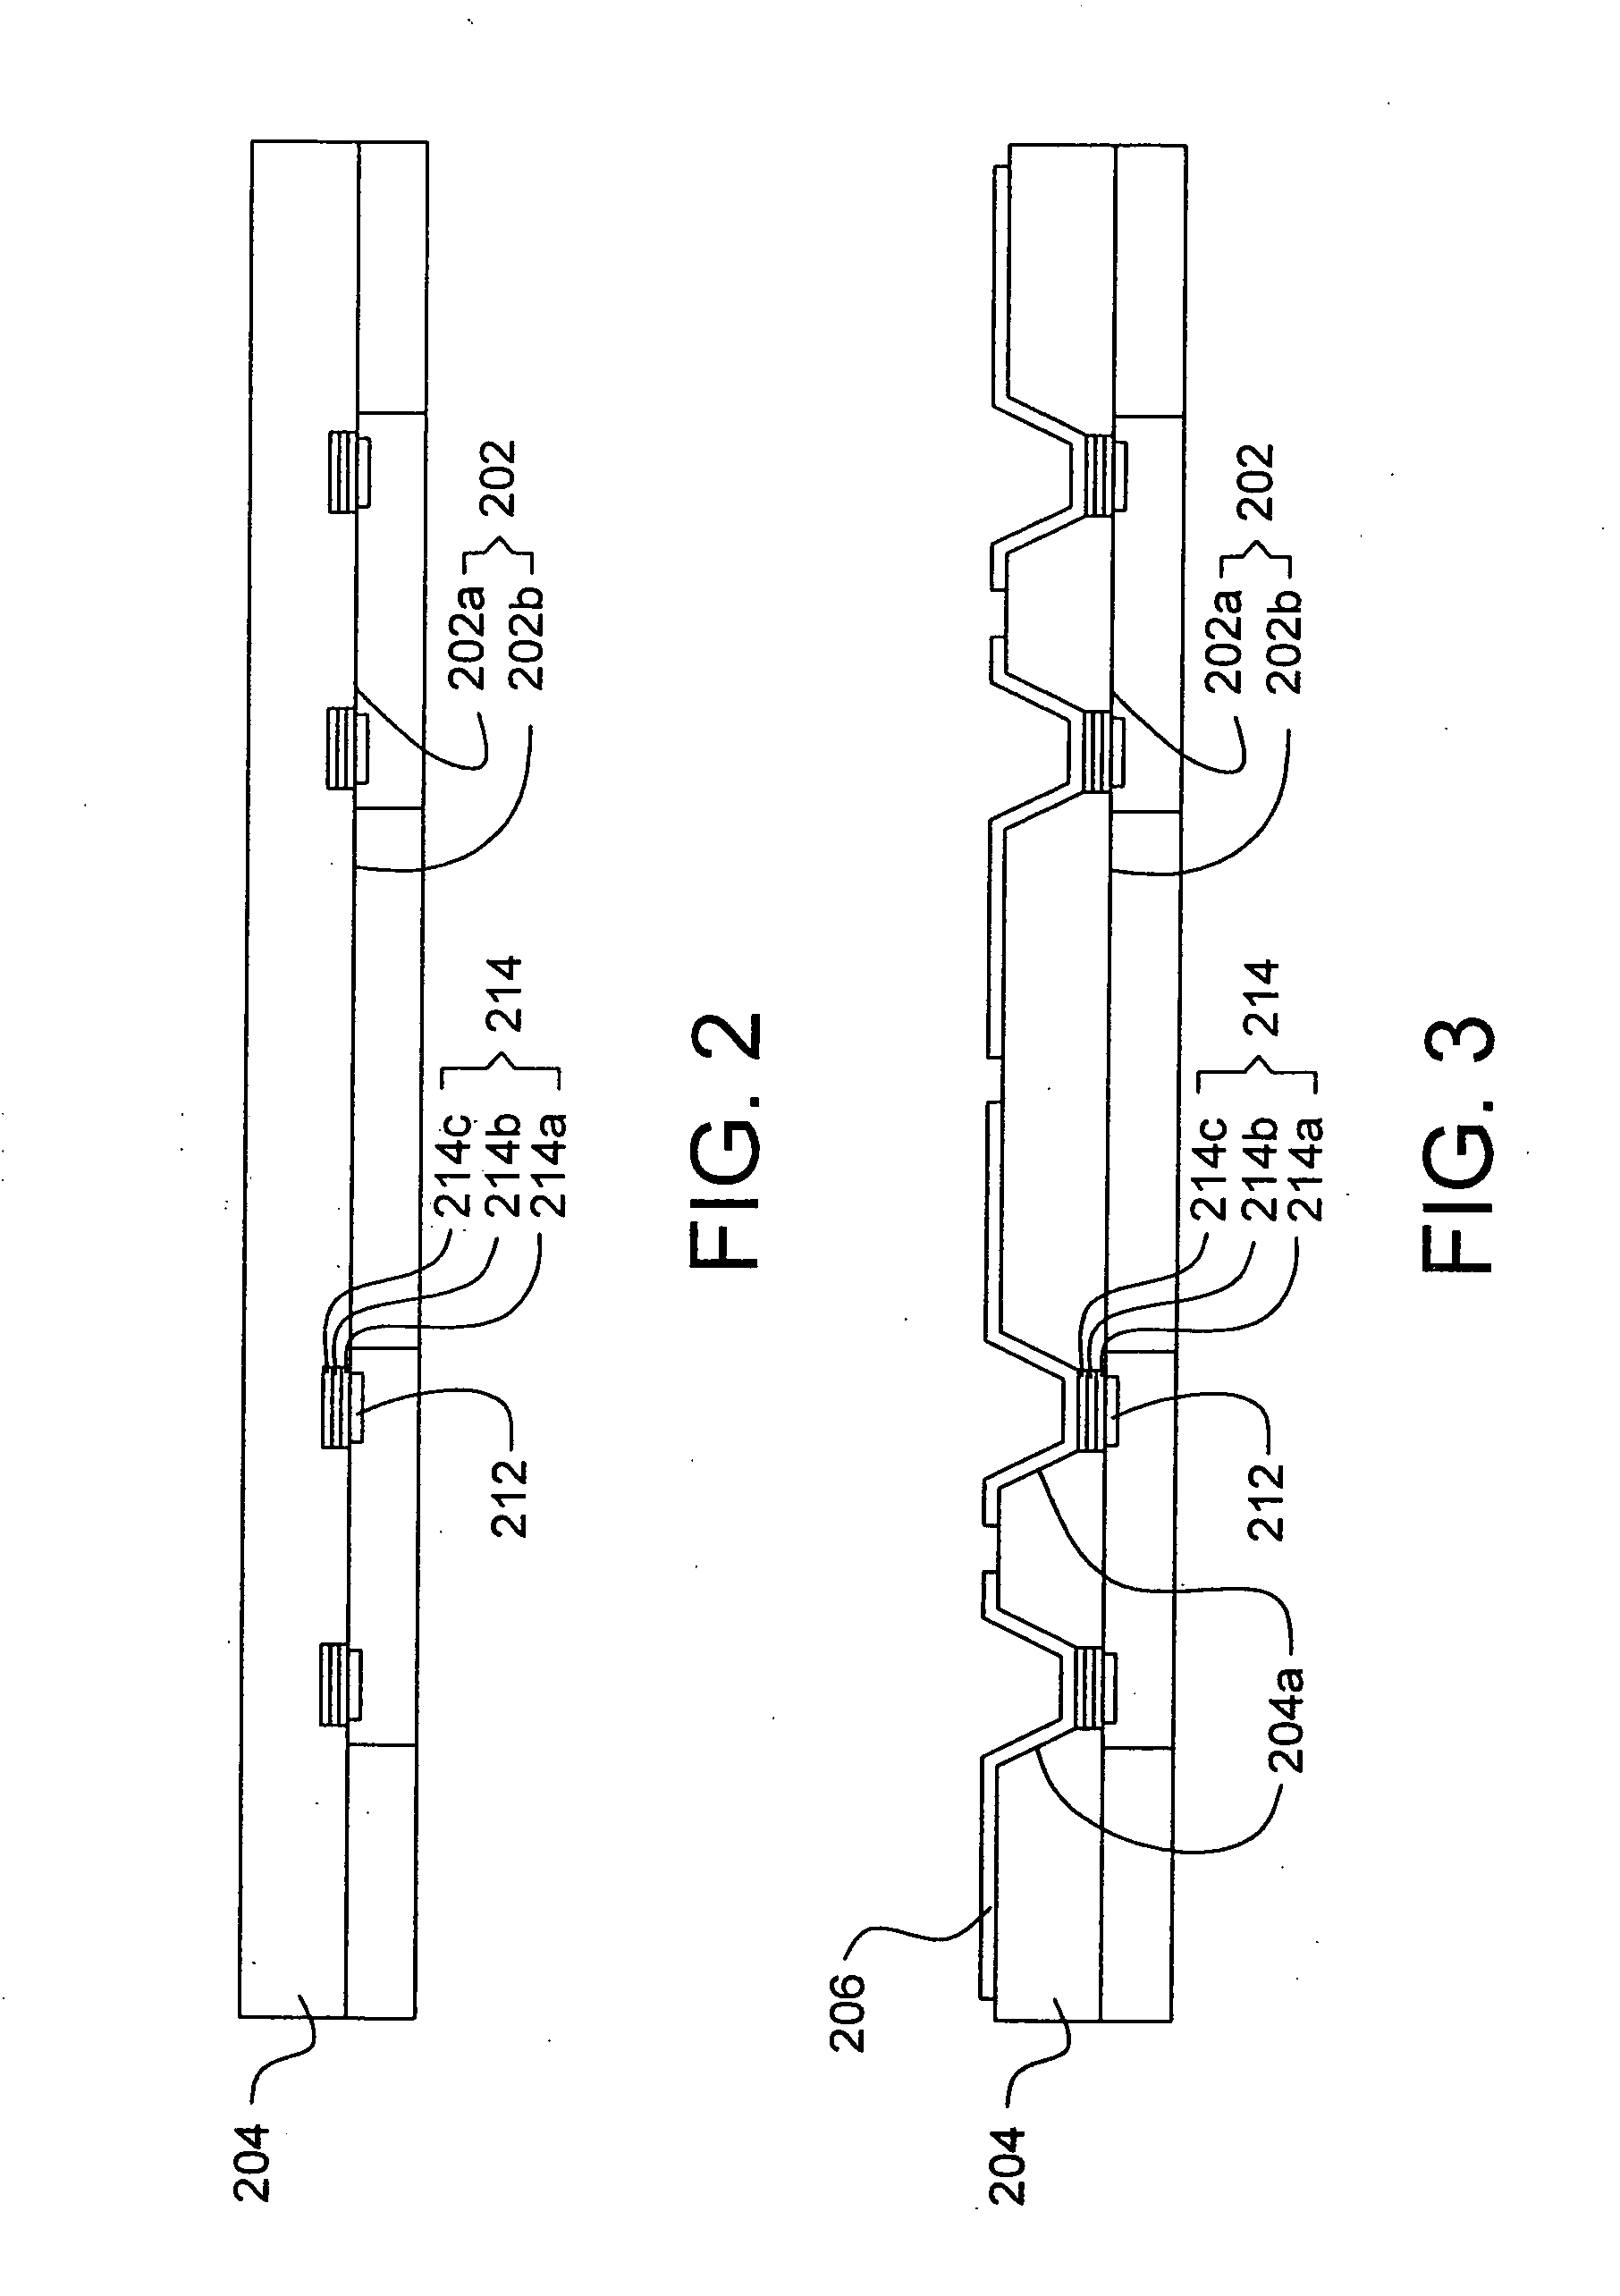 Semiconductor chip package and method for manufacturing the same